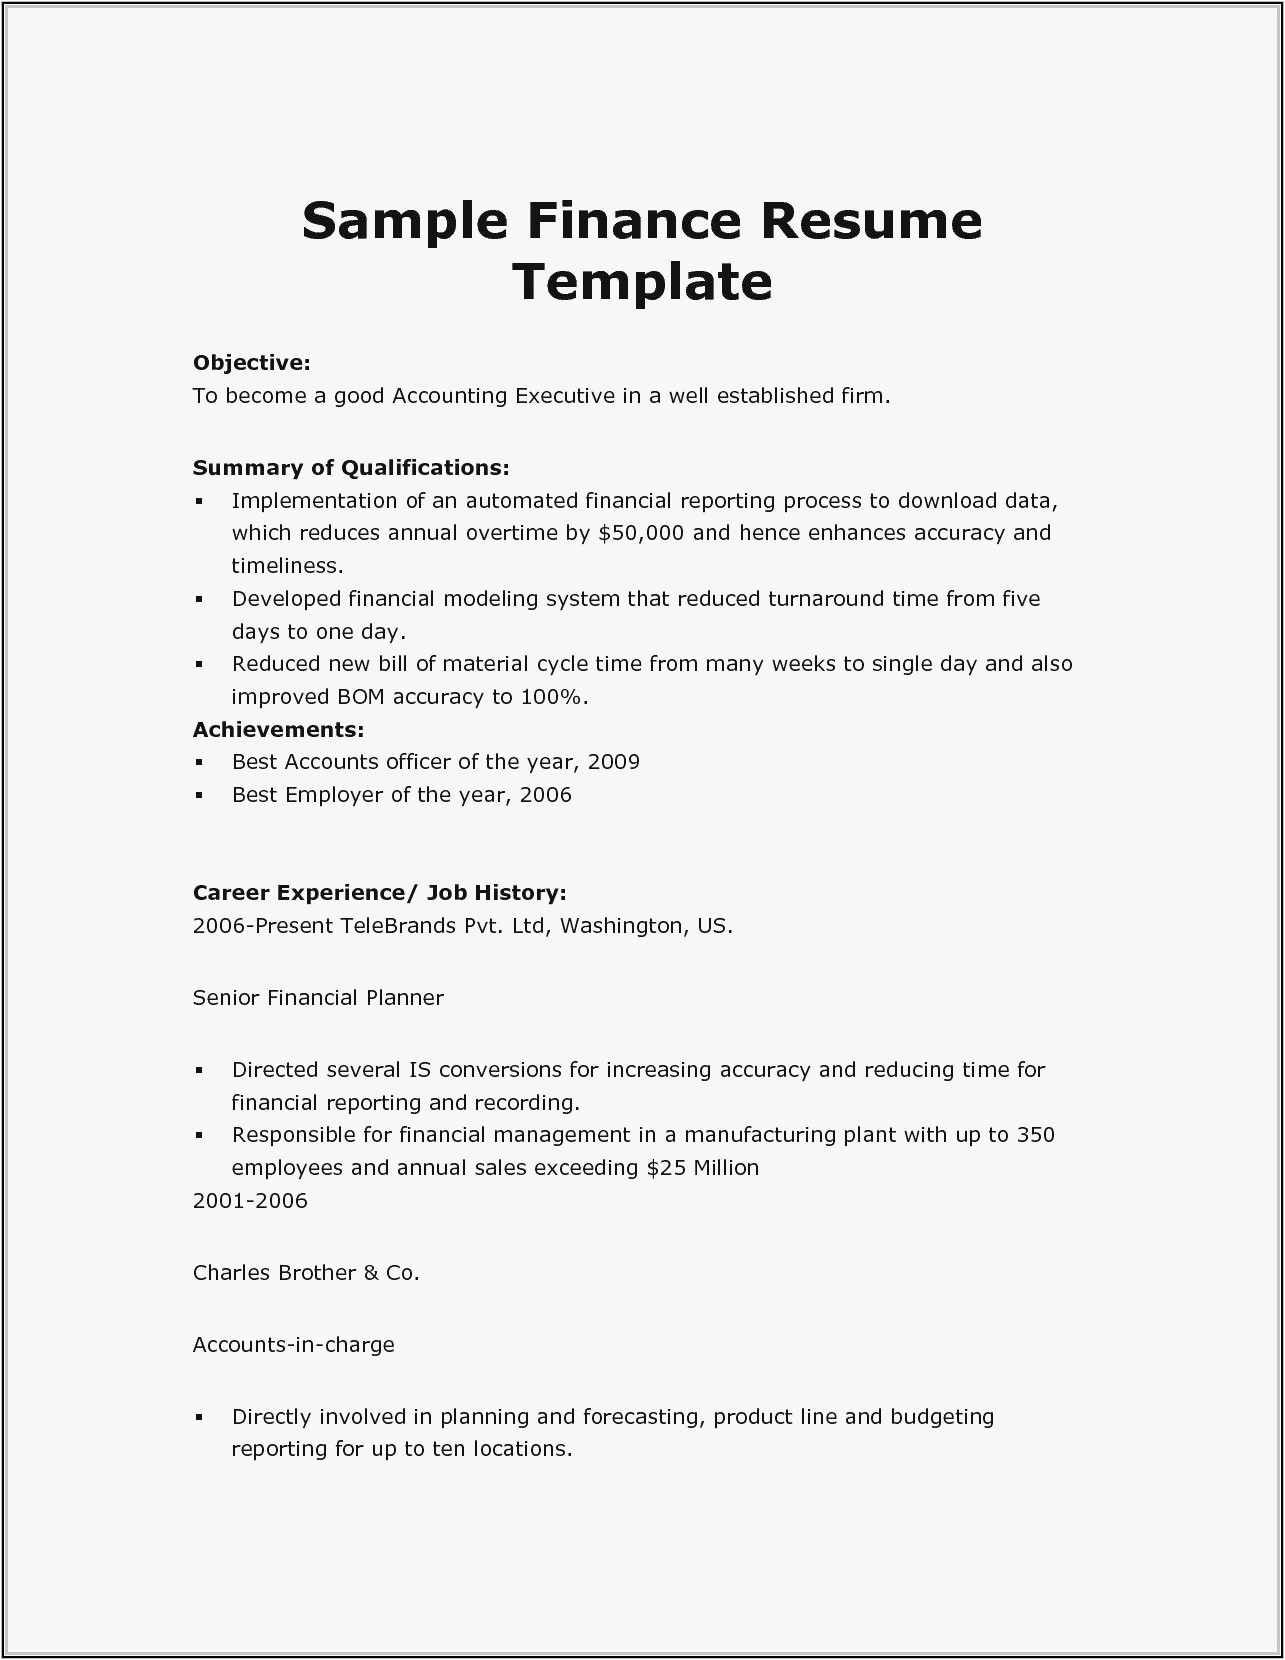 Sample Resume for Finance and Accounting Freshers Sample Resume for Mba Freshers In Finance